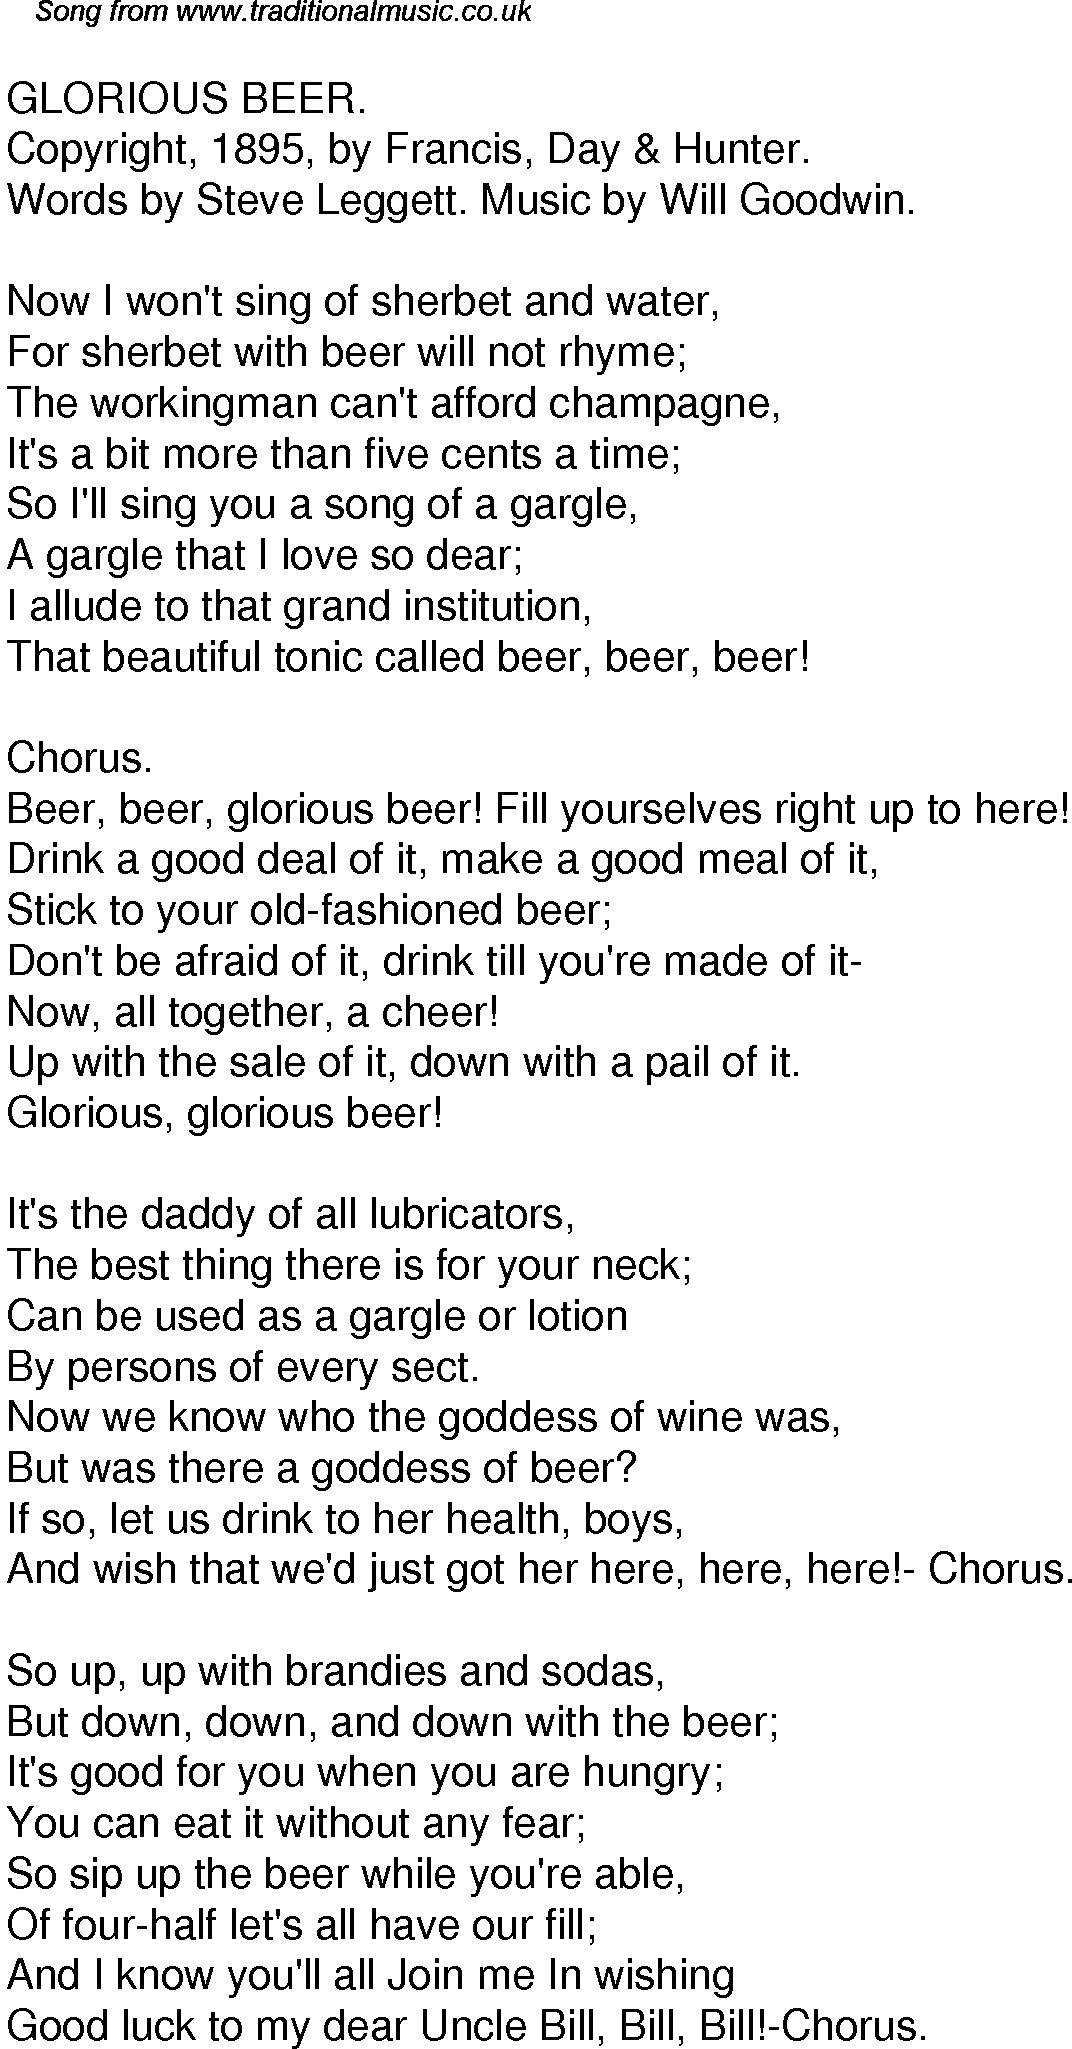 Old Time Song Lyrics For 51 Glorious Beer